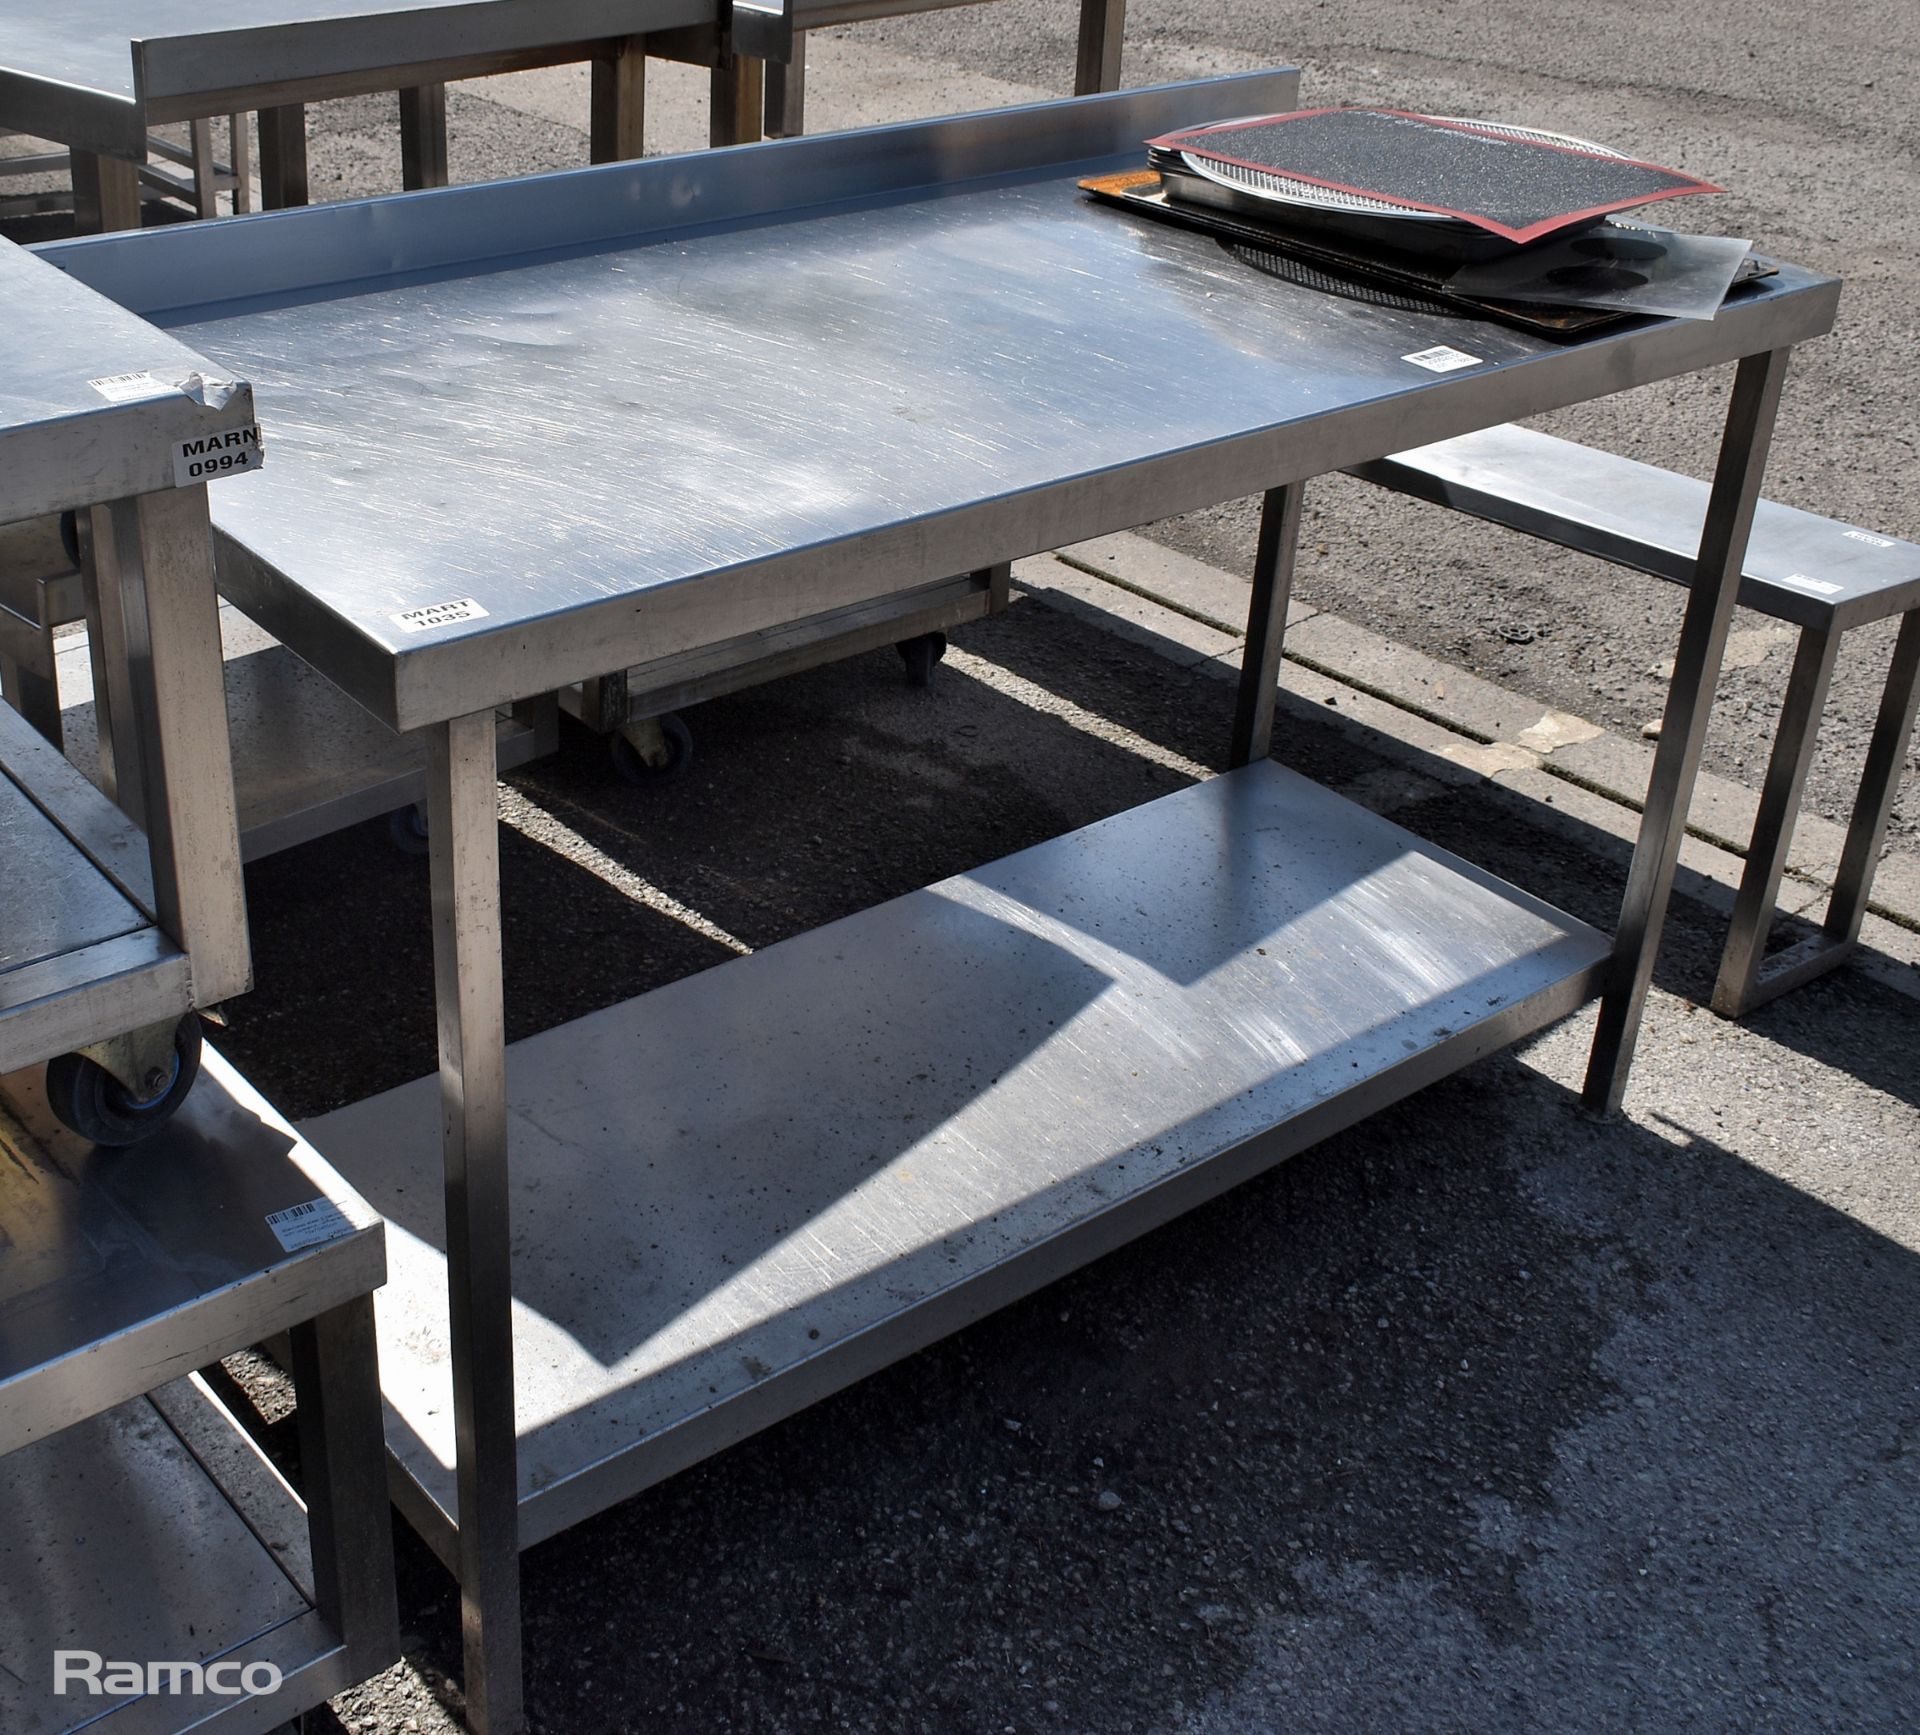 Stainless steel workbench - W 1400 x D 650 x H 920mm - Image 3 of 3